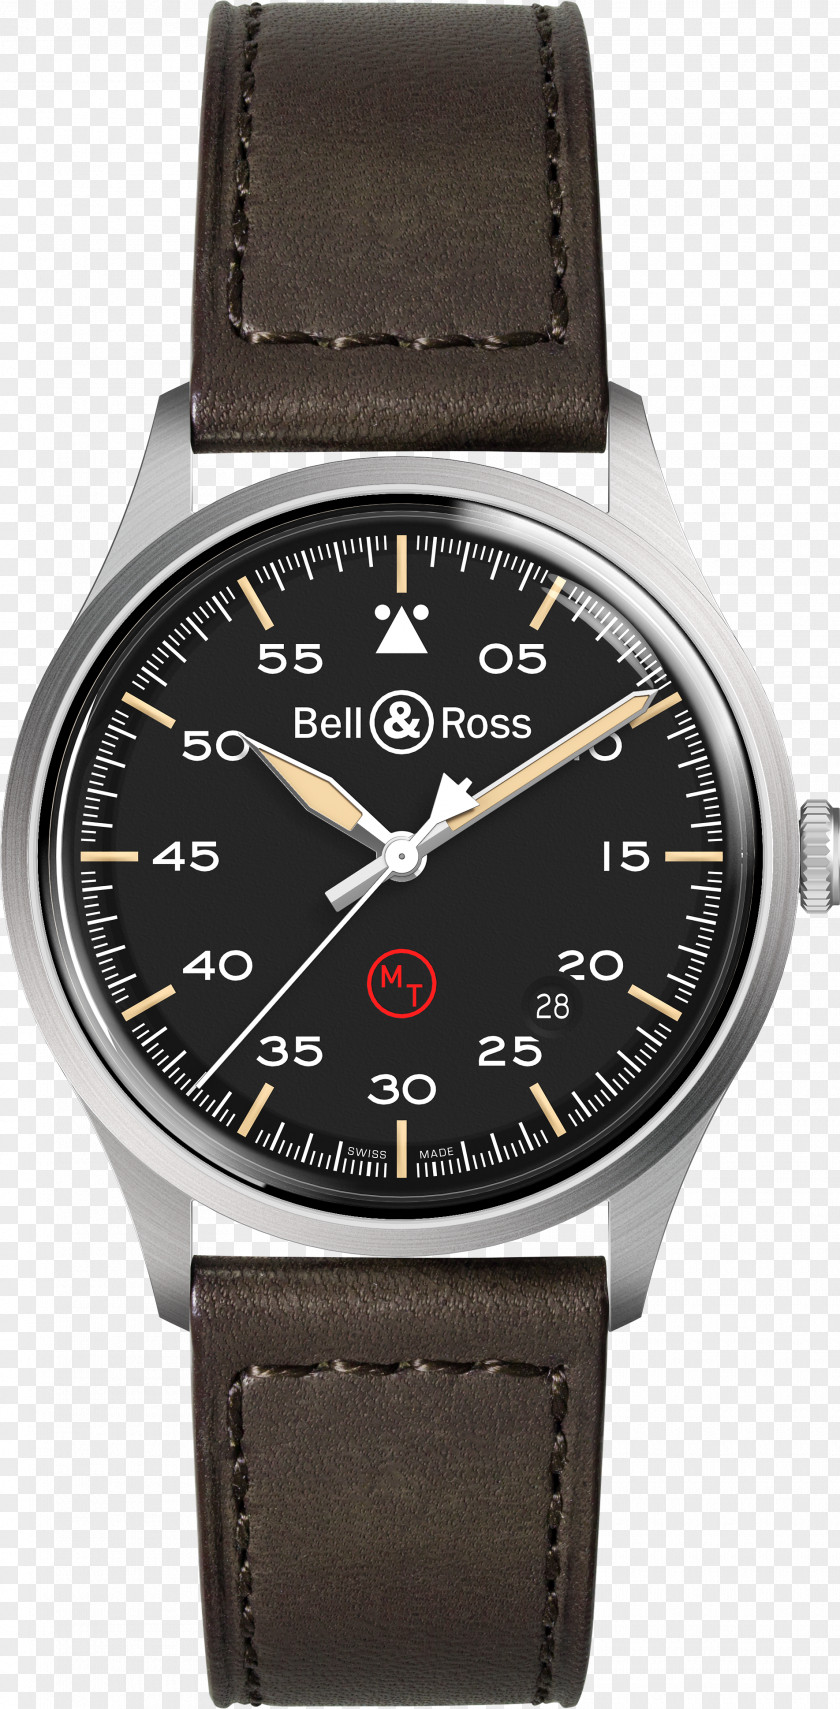 Arabic Numerals Bell & Ross Automatic Watch Baselworld Movement PNG